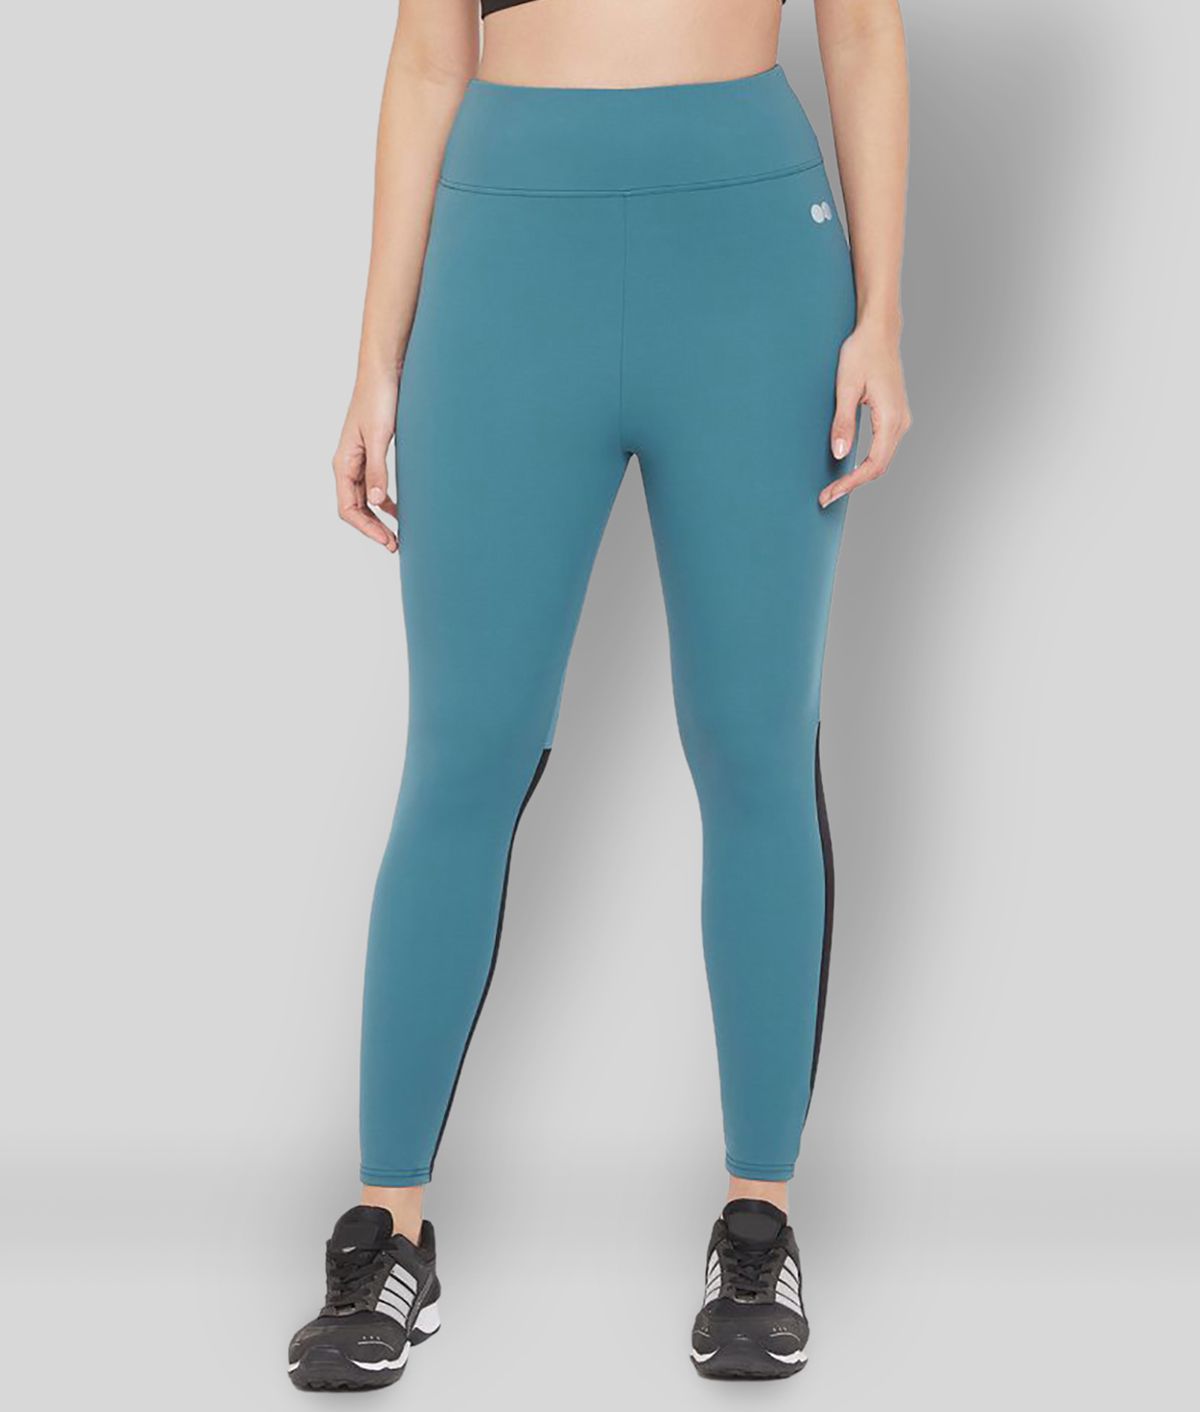     			Clovia Blue Polyester Solid Tights - Single